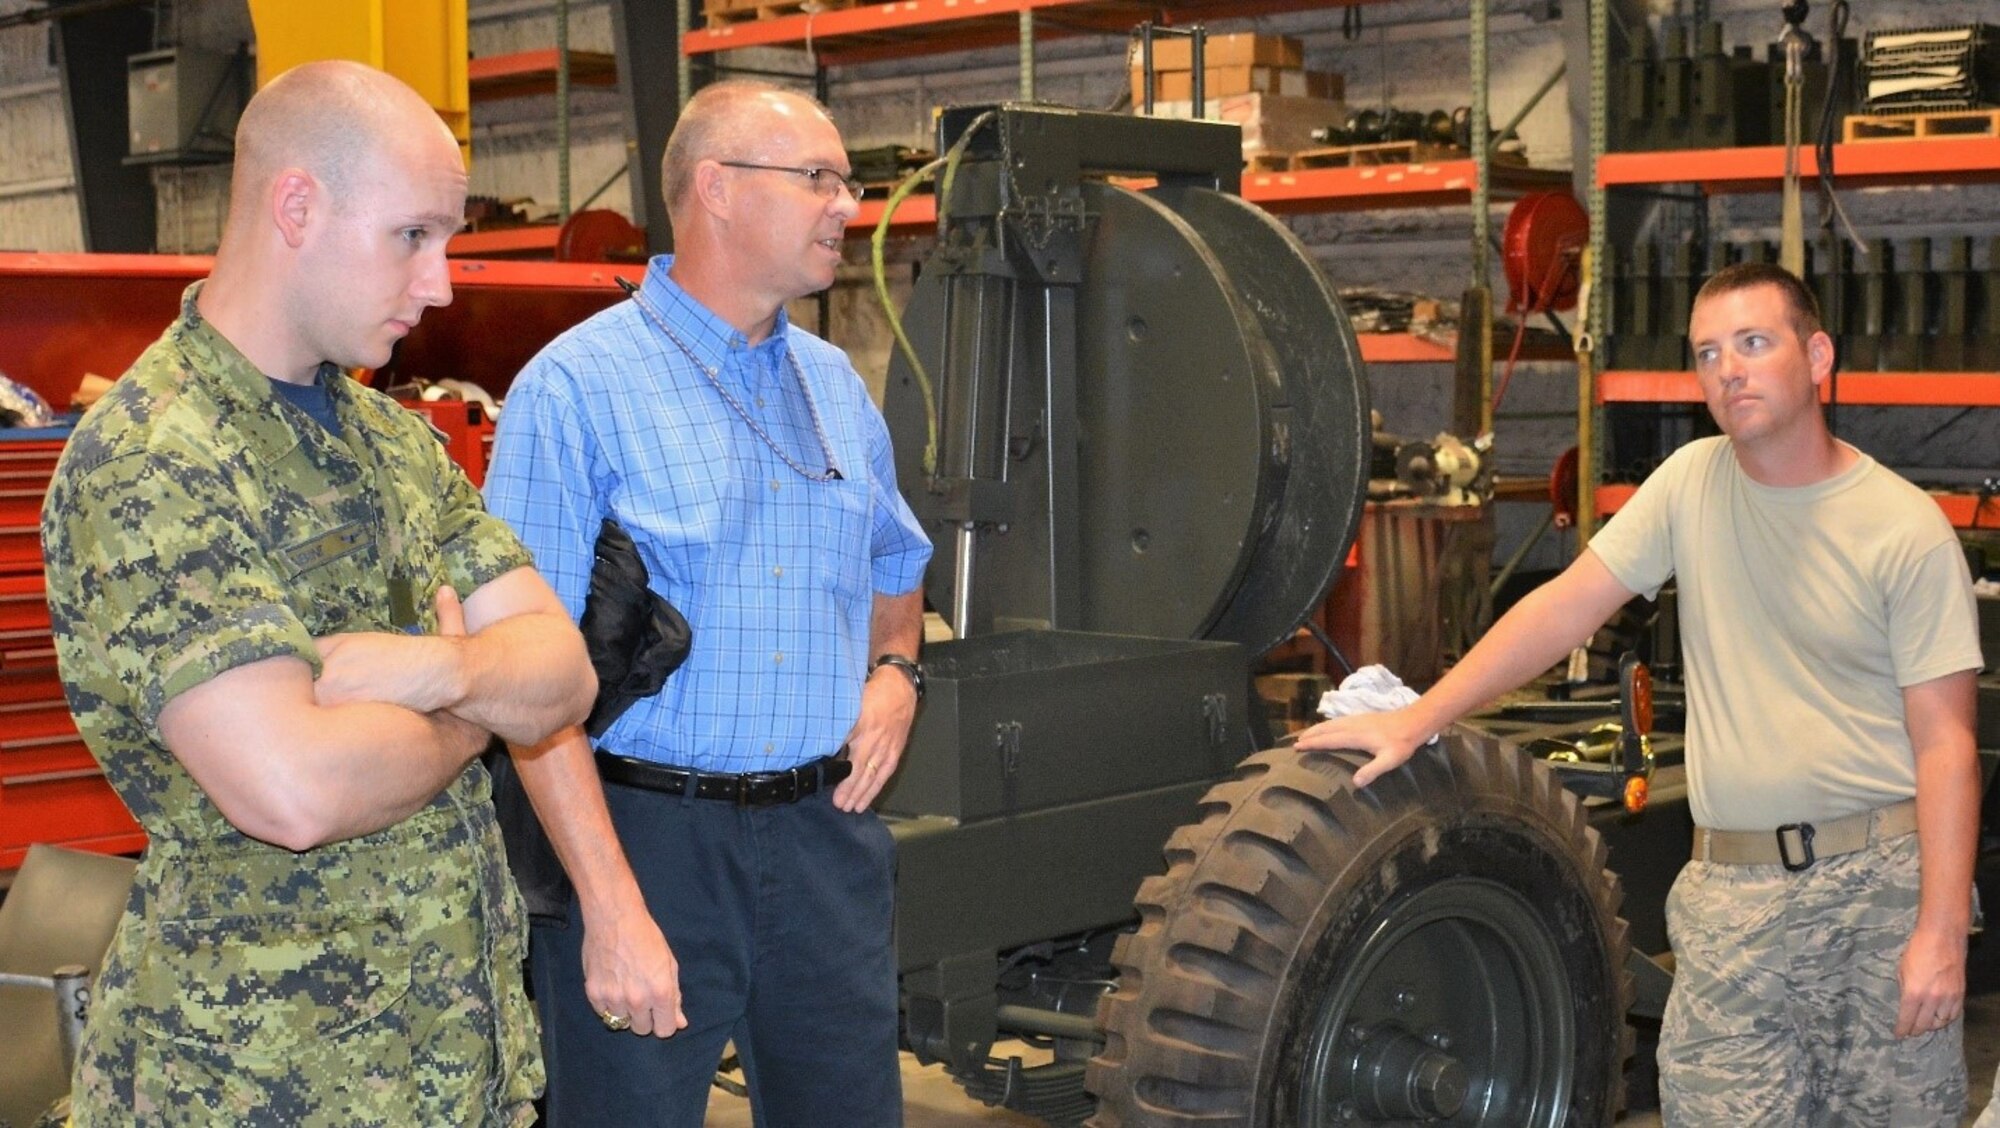 At left, Capt. Nicholas Sabine, Royal Canadian Air Force, 1 Canadian Air Division, A4 Construction Engineering, got an up close look at the U.S. Air Force Aircraft Arresting System, or AAS, during a recent visit to the Air Force Civil Engineer Center at Tyndall AFB, Florida.  Dr. Barry Mines, AFCEC Operations Directorate subject matter expert for the AAS and Staff Sgt. Ryan Moody, industrial power production craftsman were on hand to answer questions and provide an overview of the system.